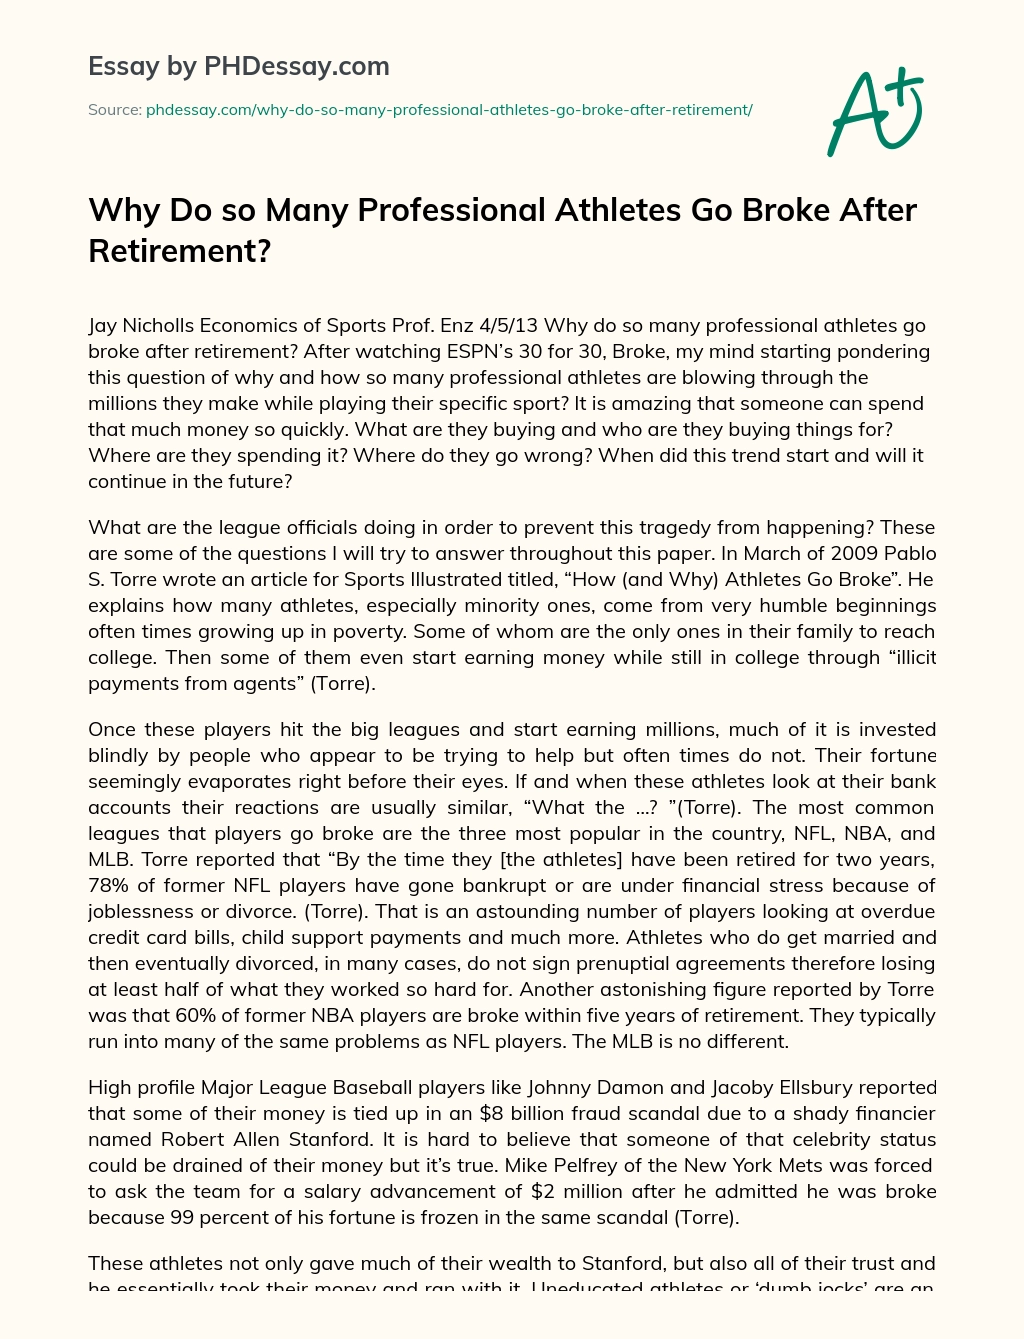 Why Do so Many Professional Athletes Go Broke After Retirement? essay